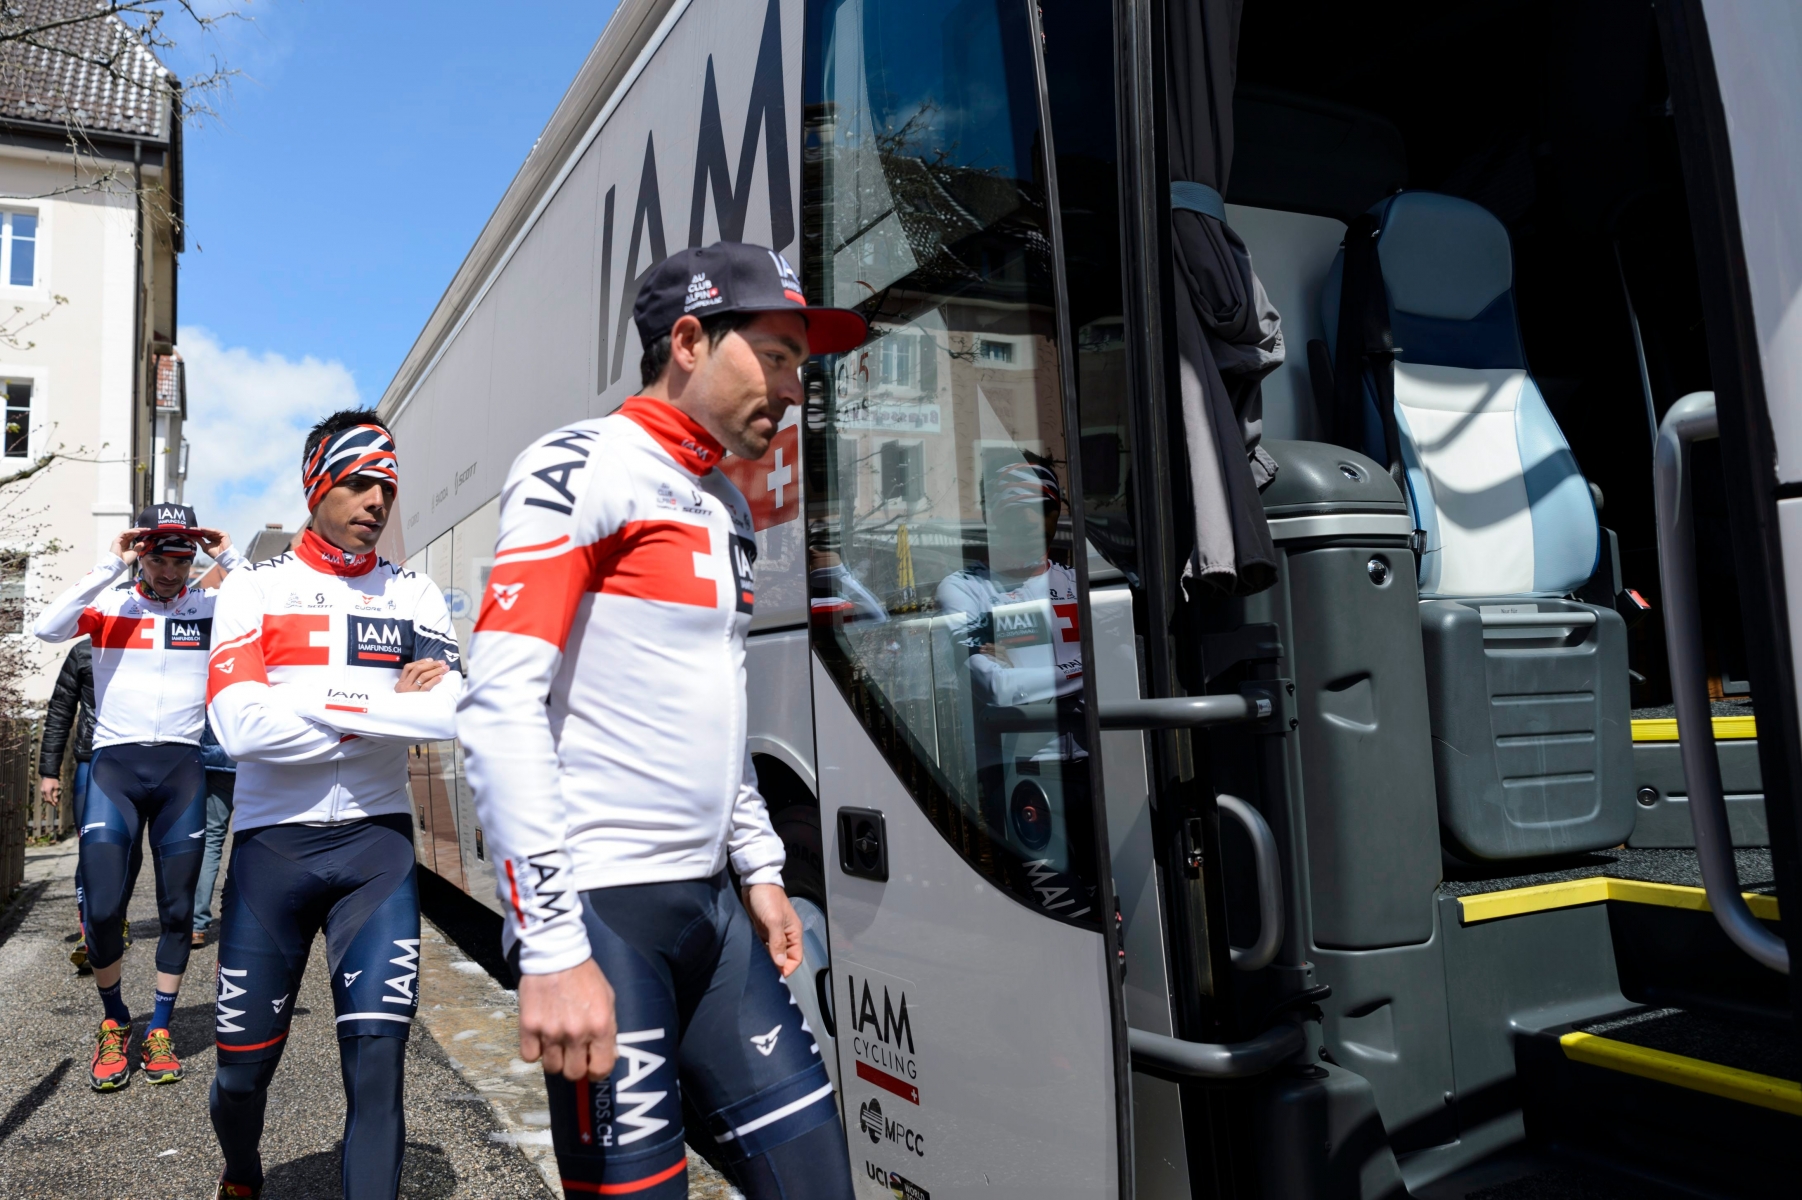 Swiss rider Oliver Zaugg, center, of team IAM Cycling, enters the team bus with teamates to go to the start of the first stage, a 100.5 km race between Mathod and Moudon during the 70th Tour de Romandie UCI ProTour cycling race in La Chaux-de-Fonds, Switzerland, Wednesday, April 27, 2016. (KEYSTONE/Jean-Christophe Bott) SWITZERLAND CYCLING TOUR DE ROMANDIE 2016